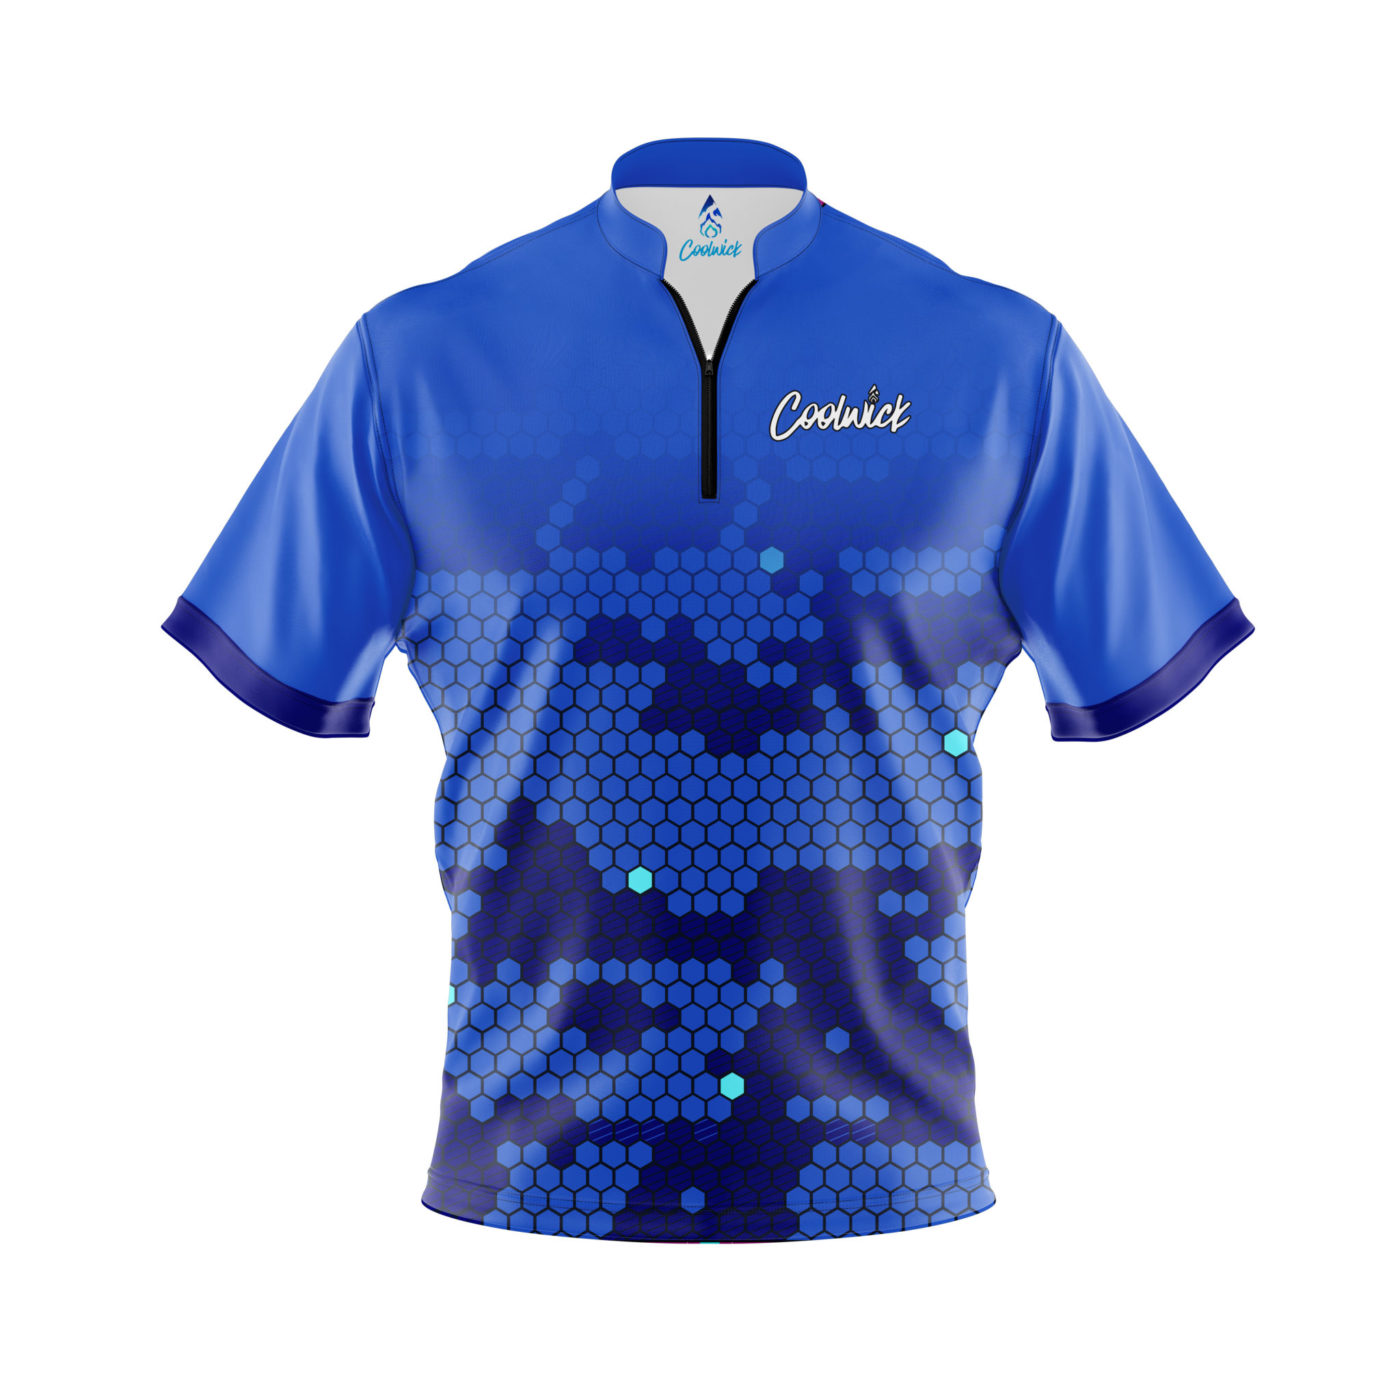 Coolwick Elite Blue Molecules Sash Zip Jersey Questions & Answers